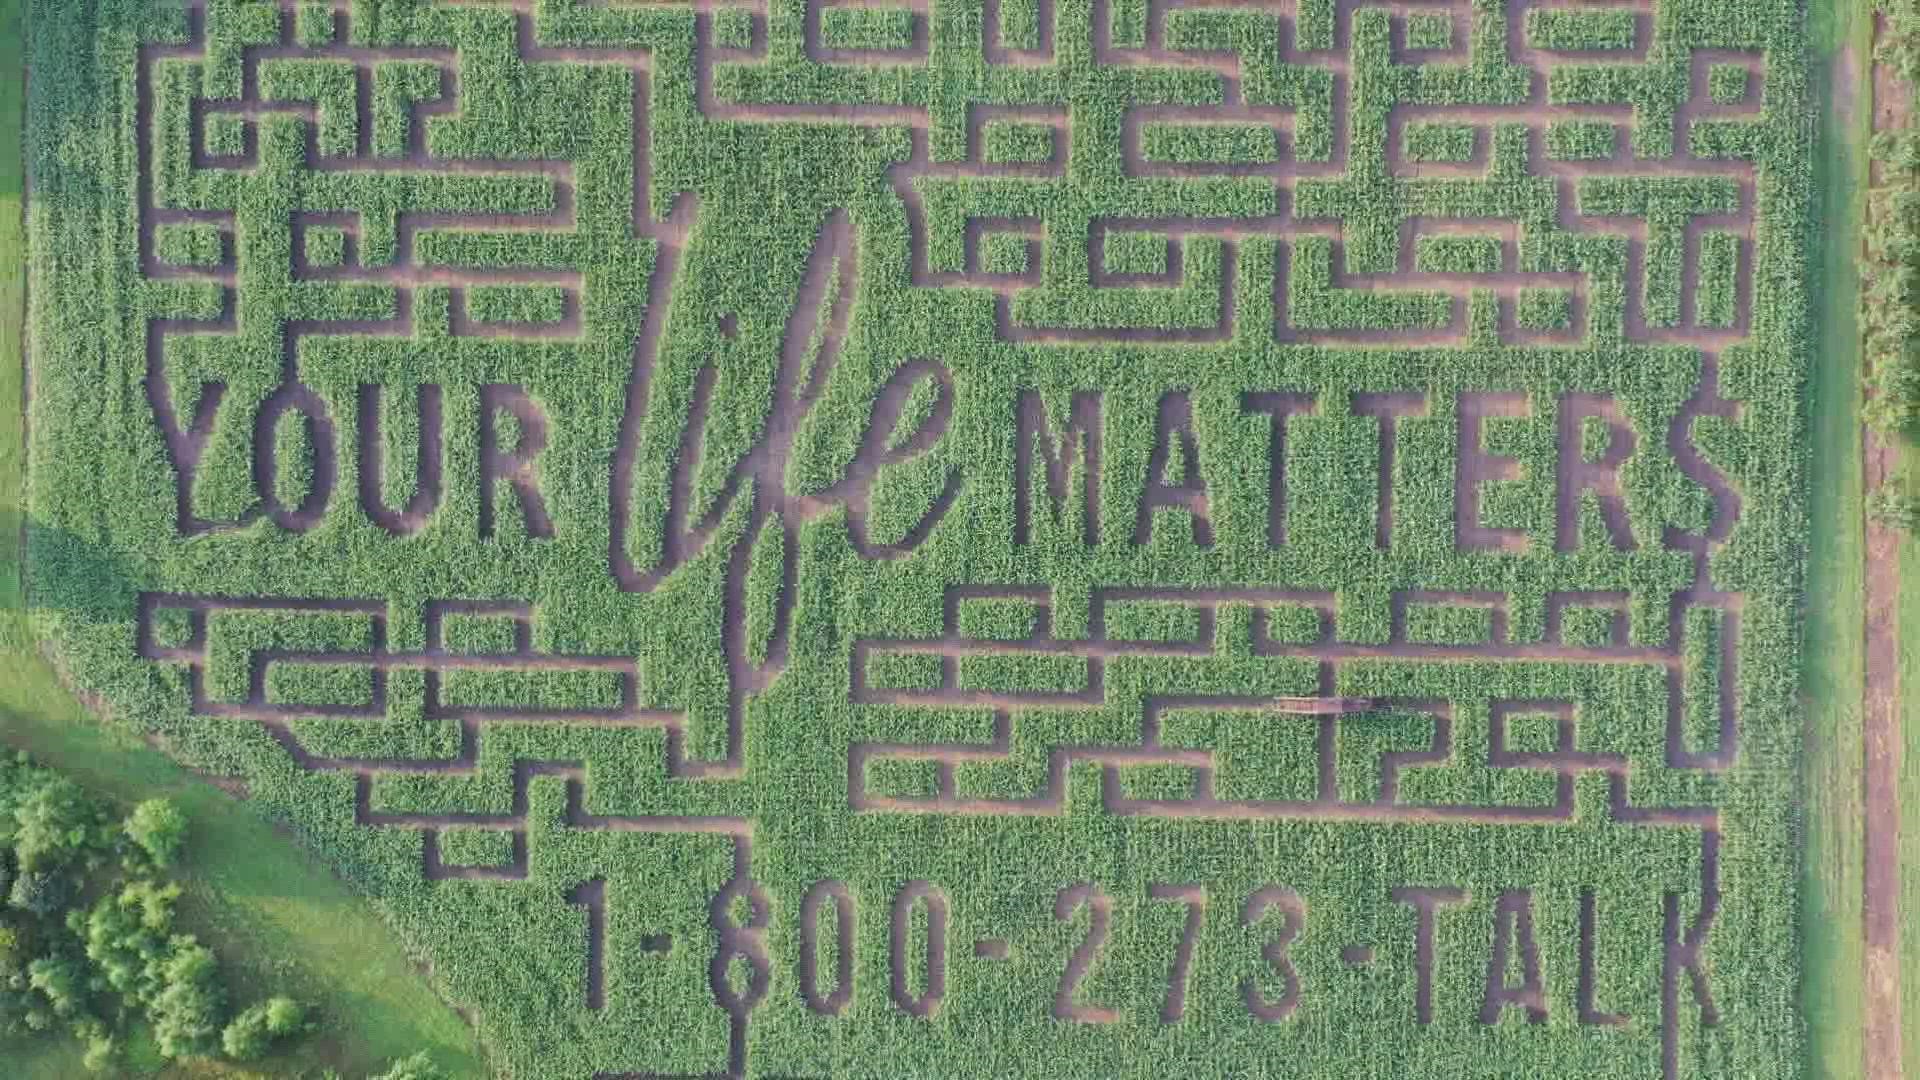 Justin Wendzel says he's been touched 3 times in his life by people who've committed suicide. So, the theme carved into his corn maze is, "Your life matters."